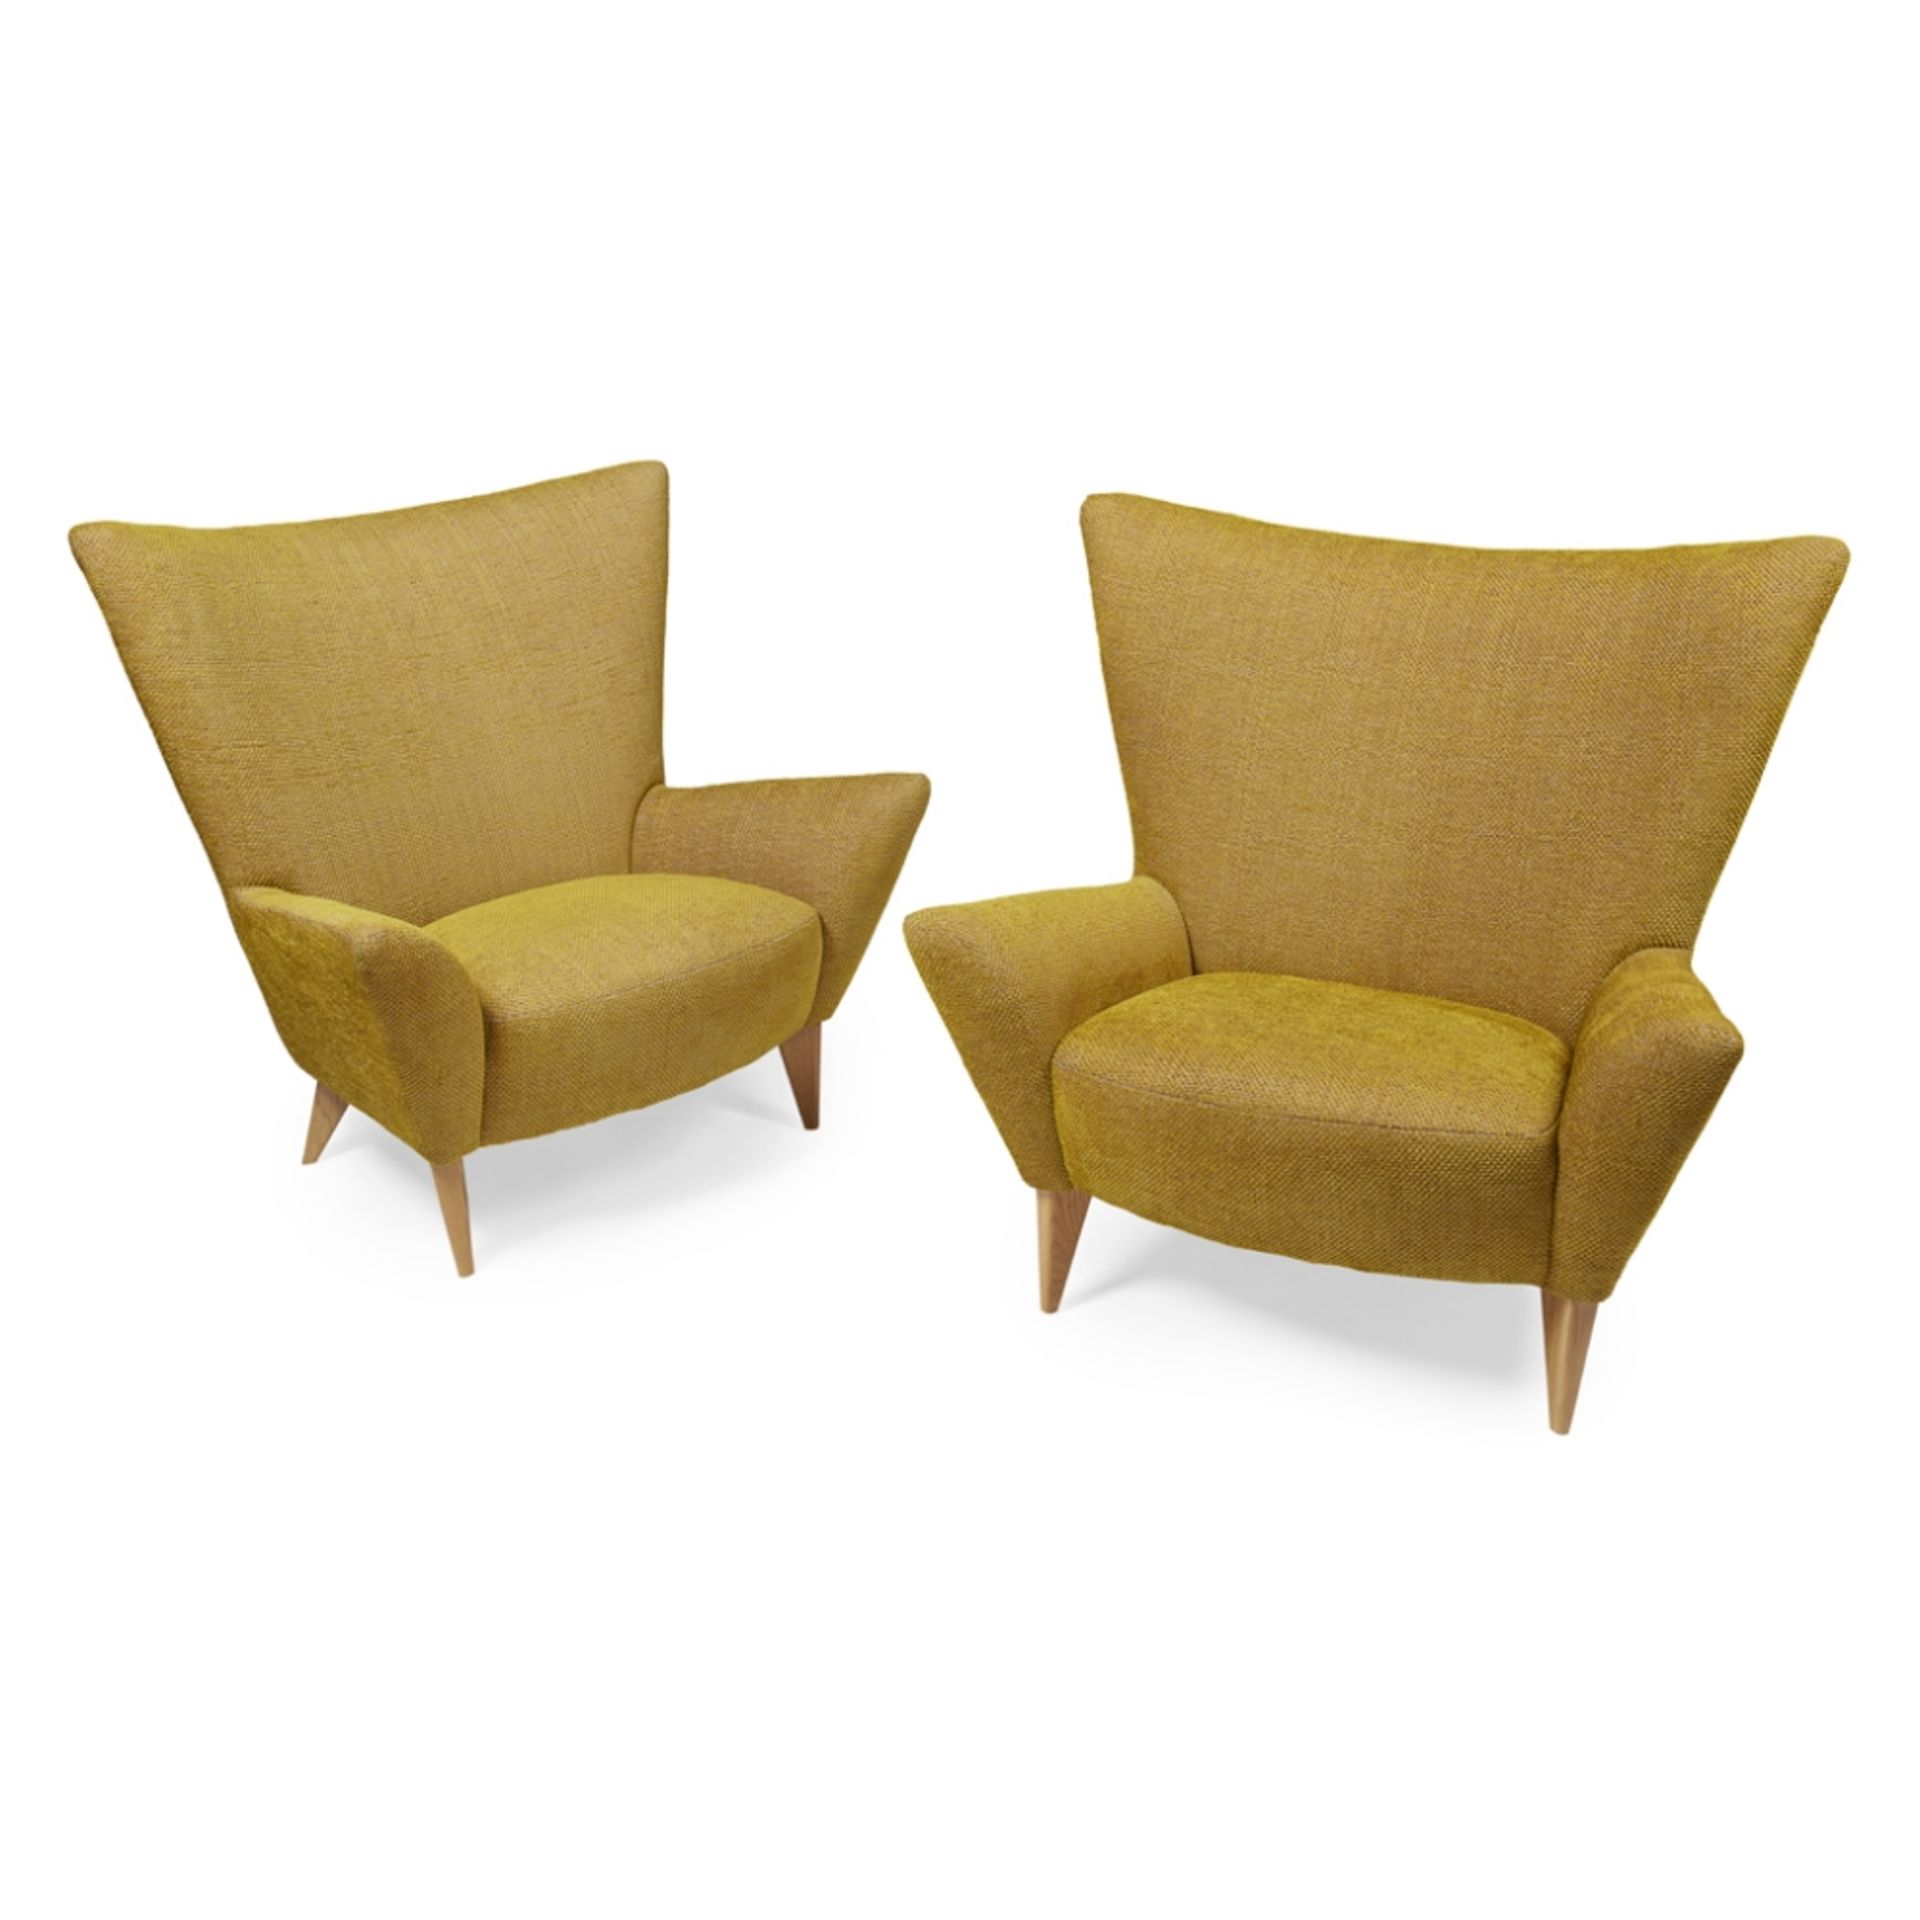 SIR TERENCE CONRAN (B. 1931) FOR CONTENT BY TERENCE CONRAN PAIR OF ‘MATADOR’ UPHOLSTERED